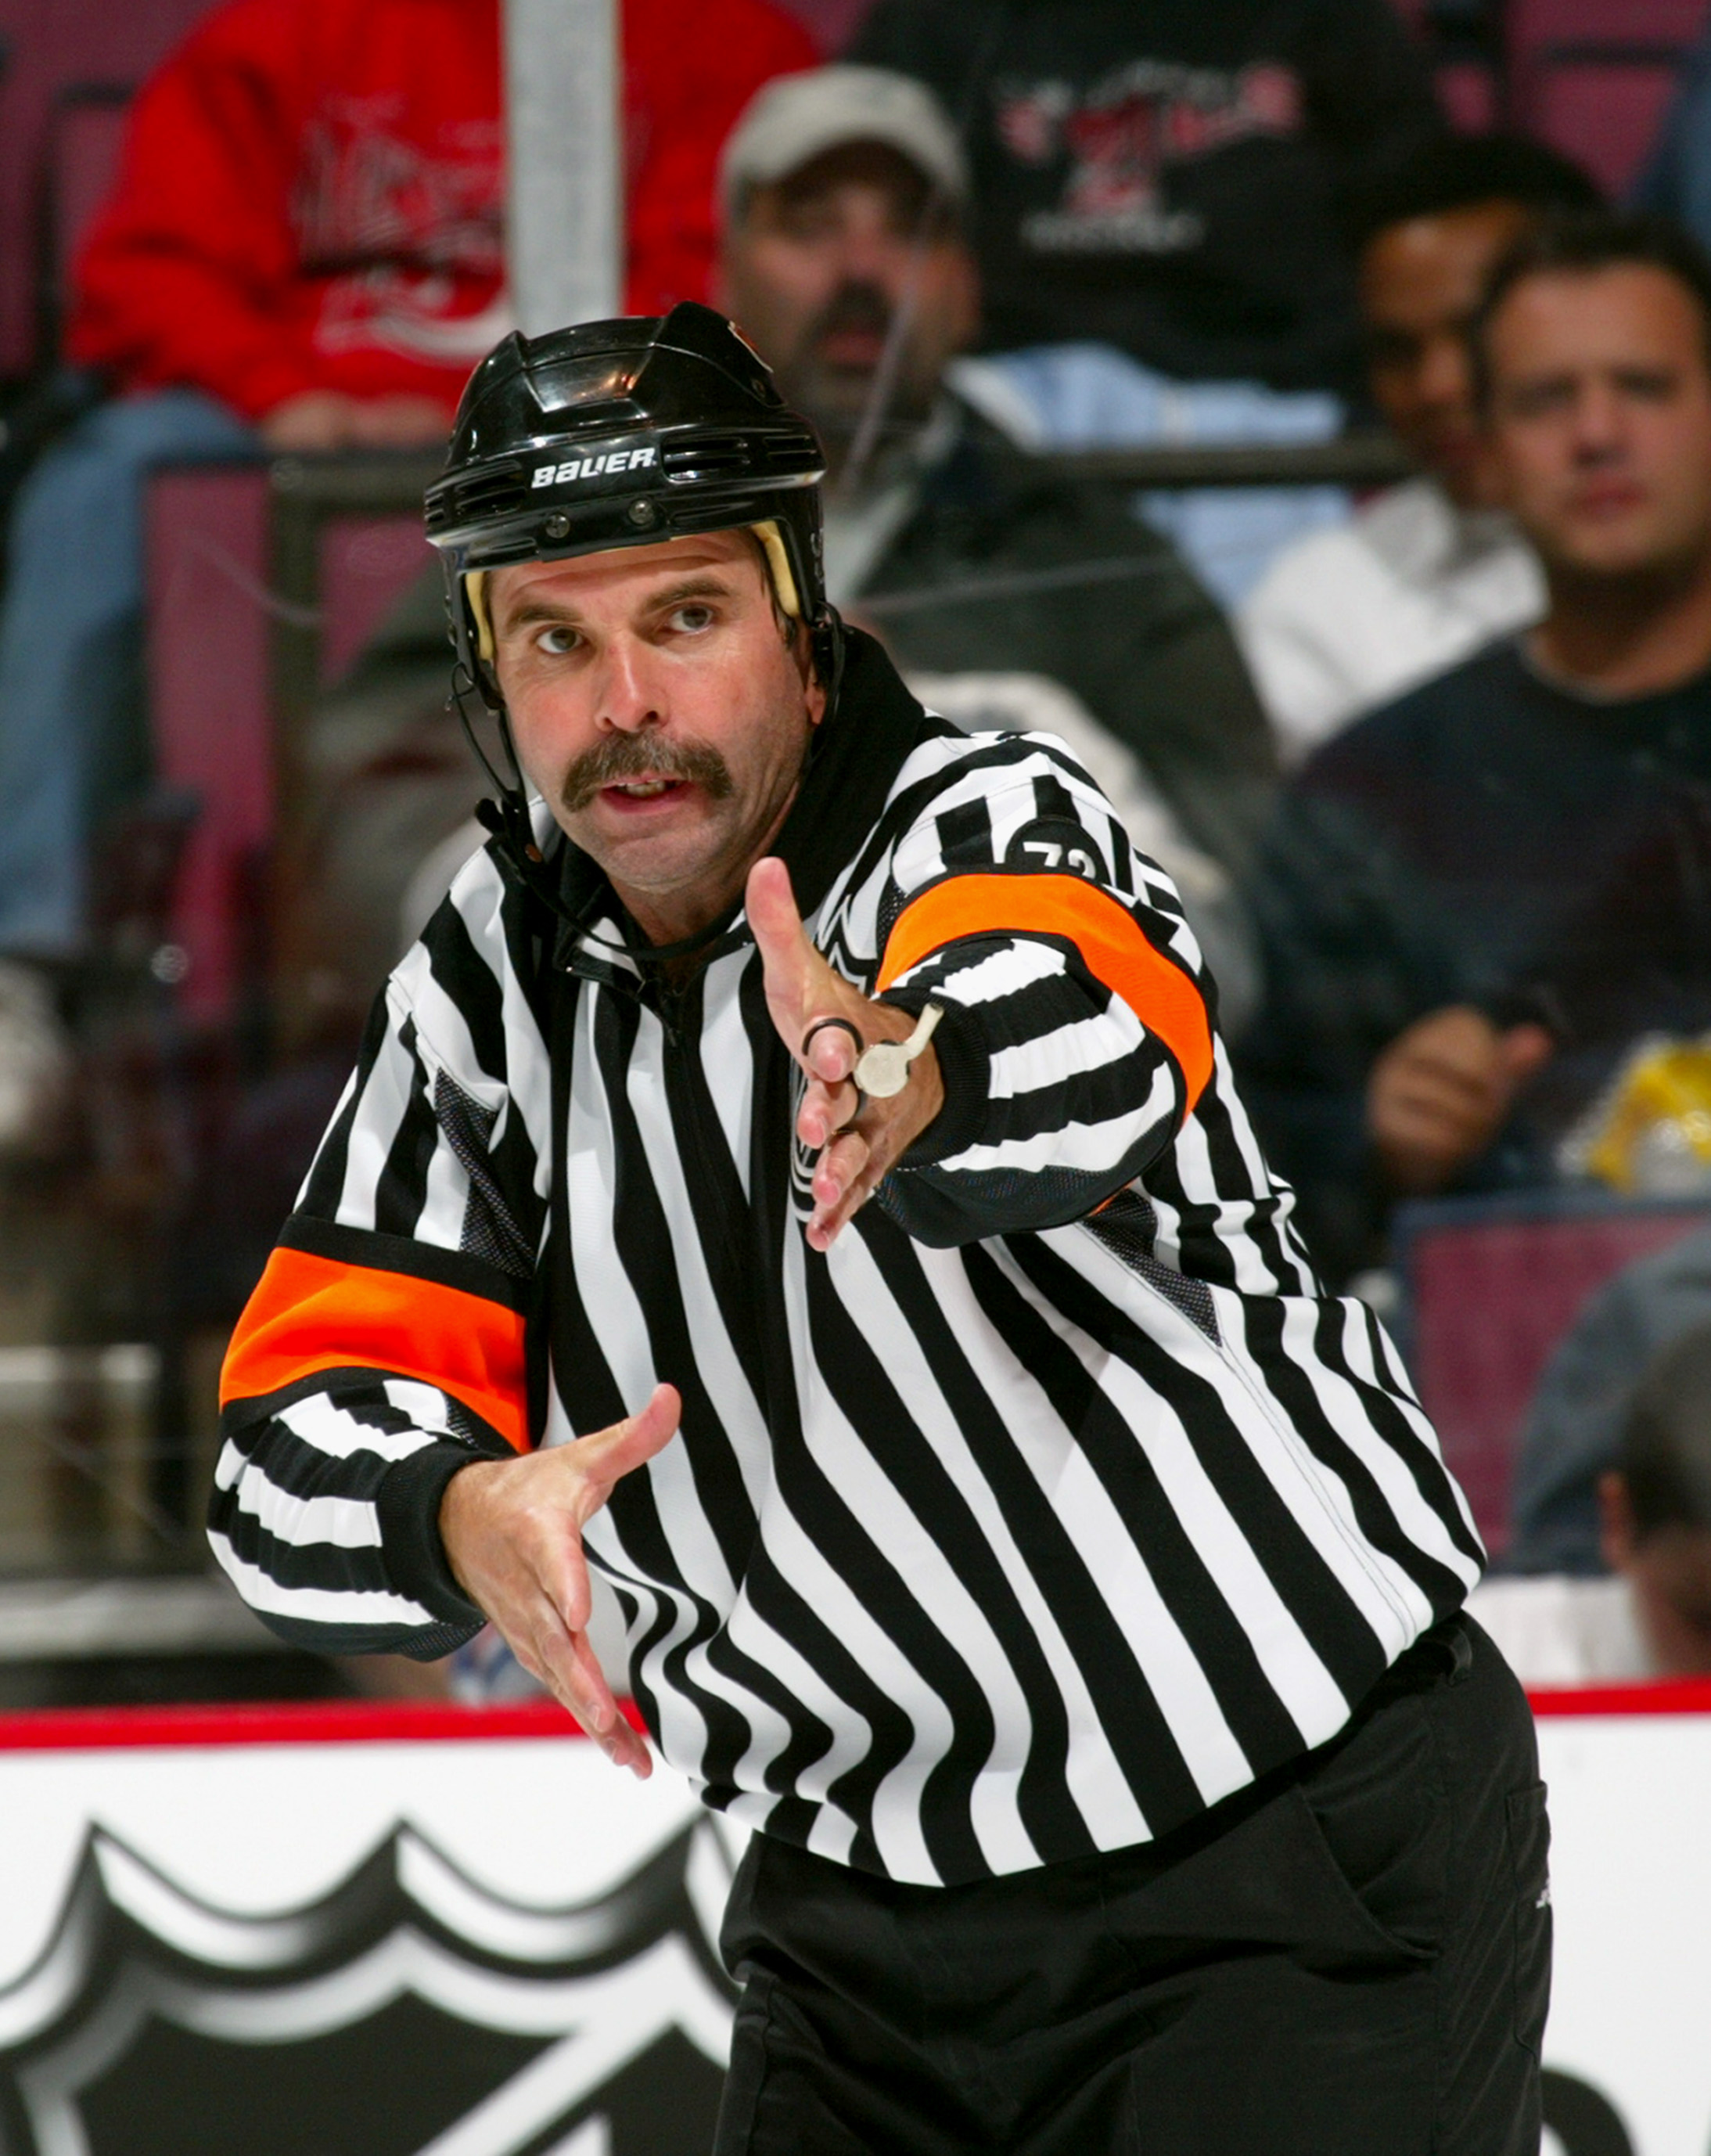 NHL refs need to do better when it comes to calling major